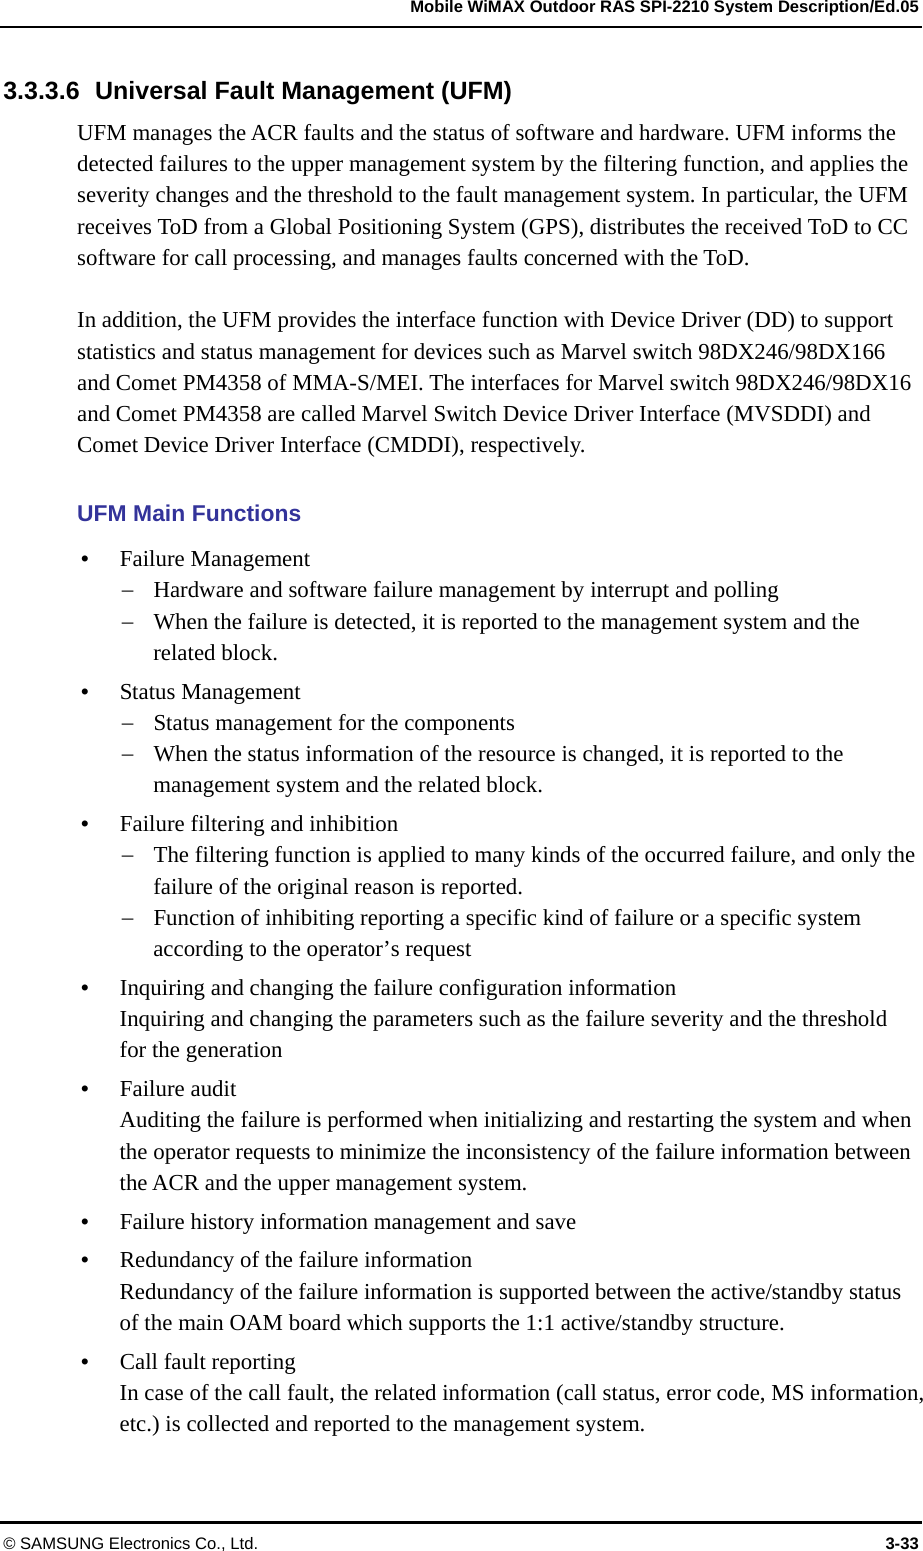   Mobile WiMAX Outdoor RAS SPI-2210 System Description/Ed.05 © SAMSUNG Electronics Co., Ltd.  3-33 3.3.3.6  Universal Fault Management (UFM) UFM manages the ACR faults and the status of software and hardware. UFM informs the detected failures to the upper management system by the filtering function, and applies the severity changes and the threshold to the fault management system. In particular, the UFM receives ToD from a Global Positioning System (GPS), distributes the received ToD to CC software for call processing, and manages faults concerned with the ToD.  In addition, the UFM provides the interface function with Device Driver (DD) to support statistics and status management for devices such as Marvel switch 98DX246/98DX166 and Comet PM4358 of MMA-S/MEI. The interfaces for Marvel switch 98DX246/98DX16 and Comet PM4358 are called Marvel Switch Device Driver Interface (MVSDDI) and Comet Device Driver Interface (CMDDI), respectively.  UFM Main Functions  Failure Management  Hardware and software failure management by interrupt and polling  When the failure is detected, it is reported to the management system and the related block.  Status Management  Status management for the components  When the status information of the resource is changed, it is reported to the management system and the related block.  Failure filtering and inhibition  The filtering function is applied to many kinds of the occurred failure, and only the failure of the original reason is reported.  Function of inhibiting reporting a specific kind of failure or a specific system according to the operator’s request  Inquiring and changing the failure configuration information Inquiring and changing the parameters such as the failure severity and the threshold for the generation  Failure audit Auditing the failure is performed when initializing and restarting the system and when the operator requests to minimize the inconsistency of the failure information between the ACR and the upper management system.  Failure history information management and save  Redundancy of the failure information Redundancy of the failure information is supported between the active/standby status of the main OAM board which supports the 1:1 active/standby structure.  Call fault reporting In case of the call fault, the related information (call status, error code, MS information, etc.) is collected and reported to the management system. 